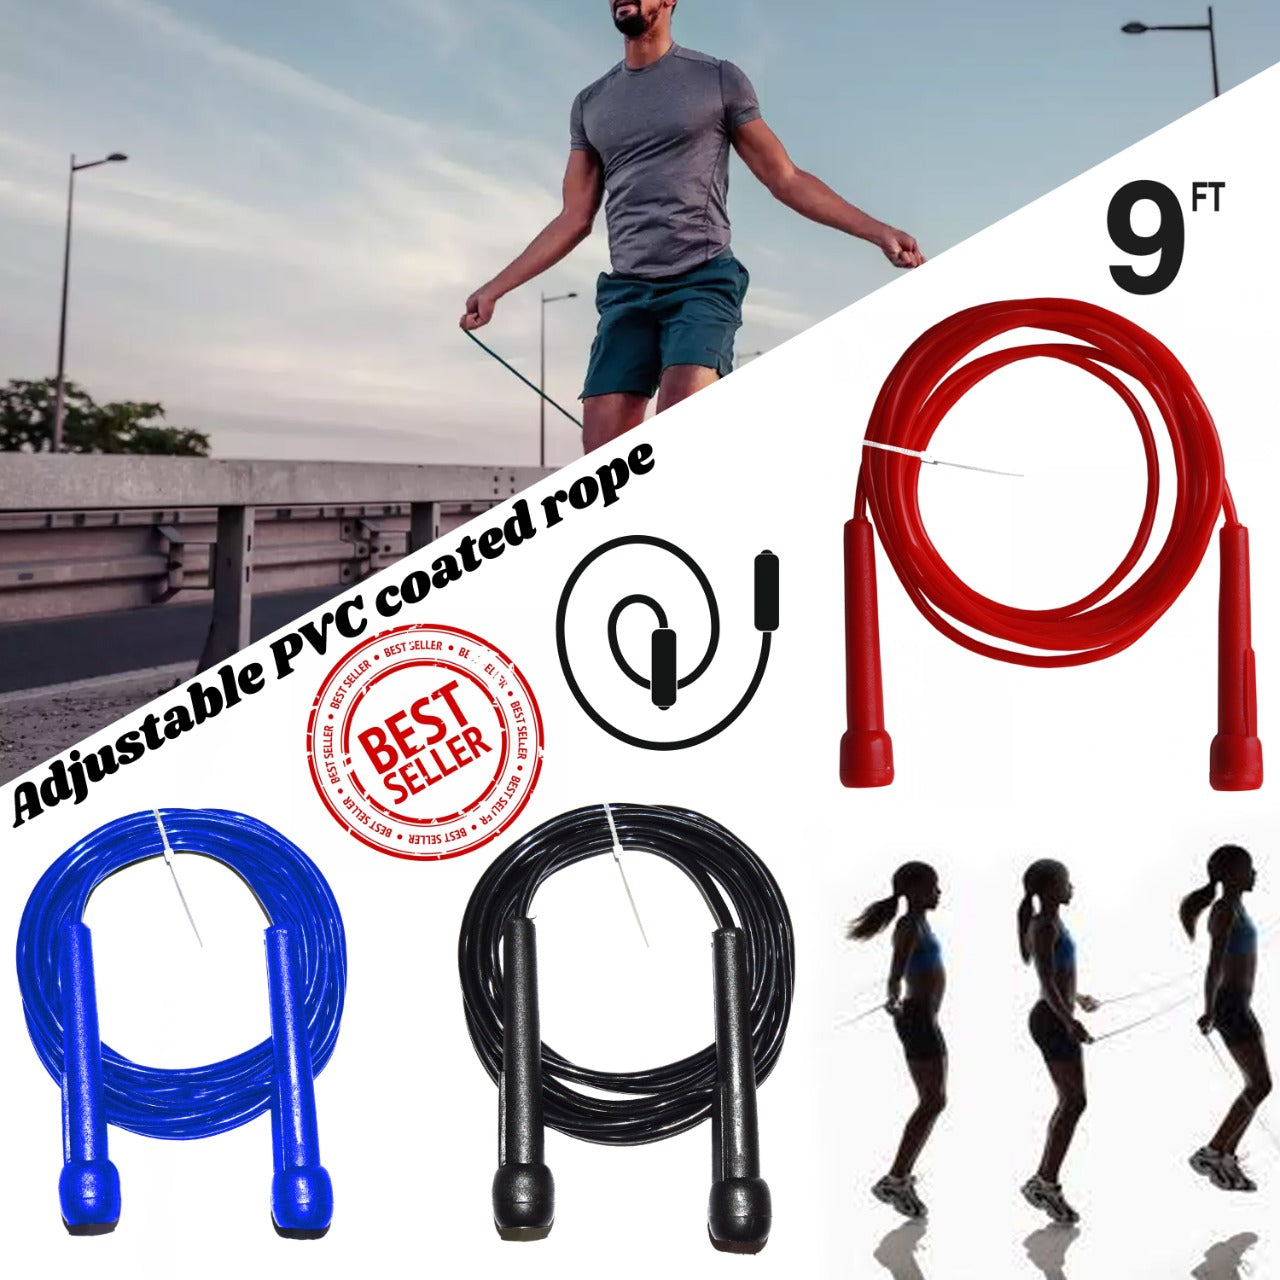 Jumping Ropes Nylon Repton Fitness and Boxing Gears